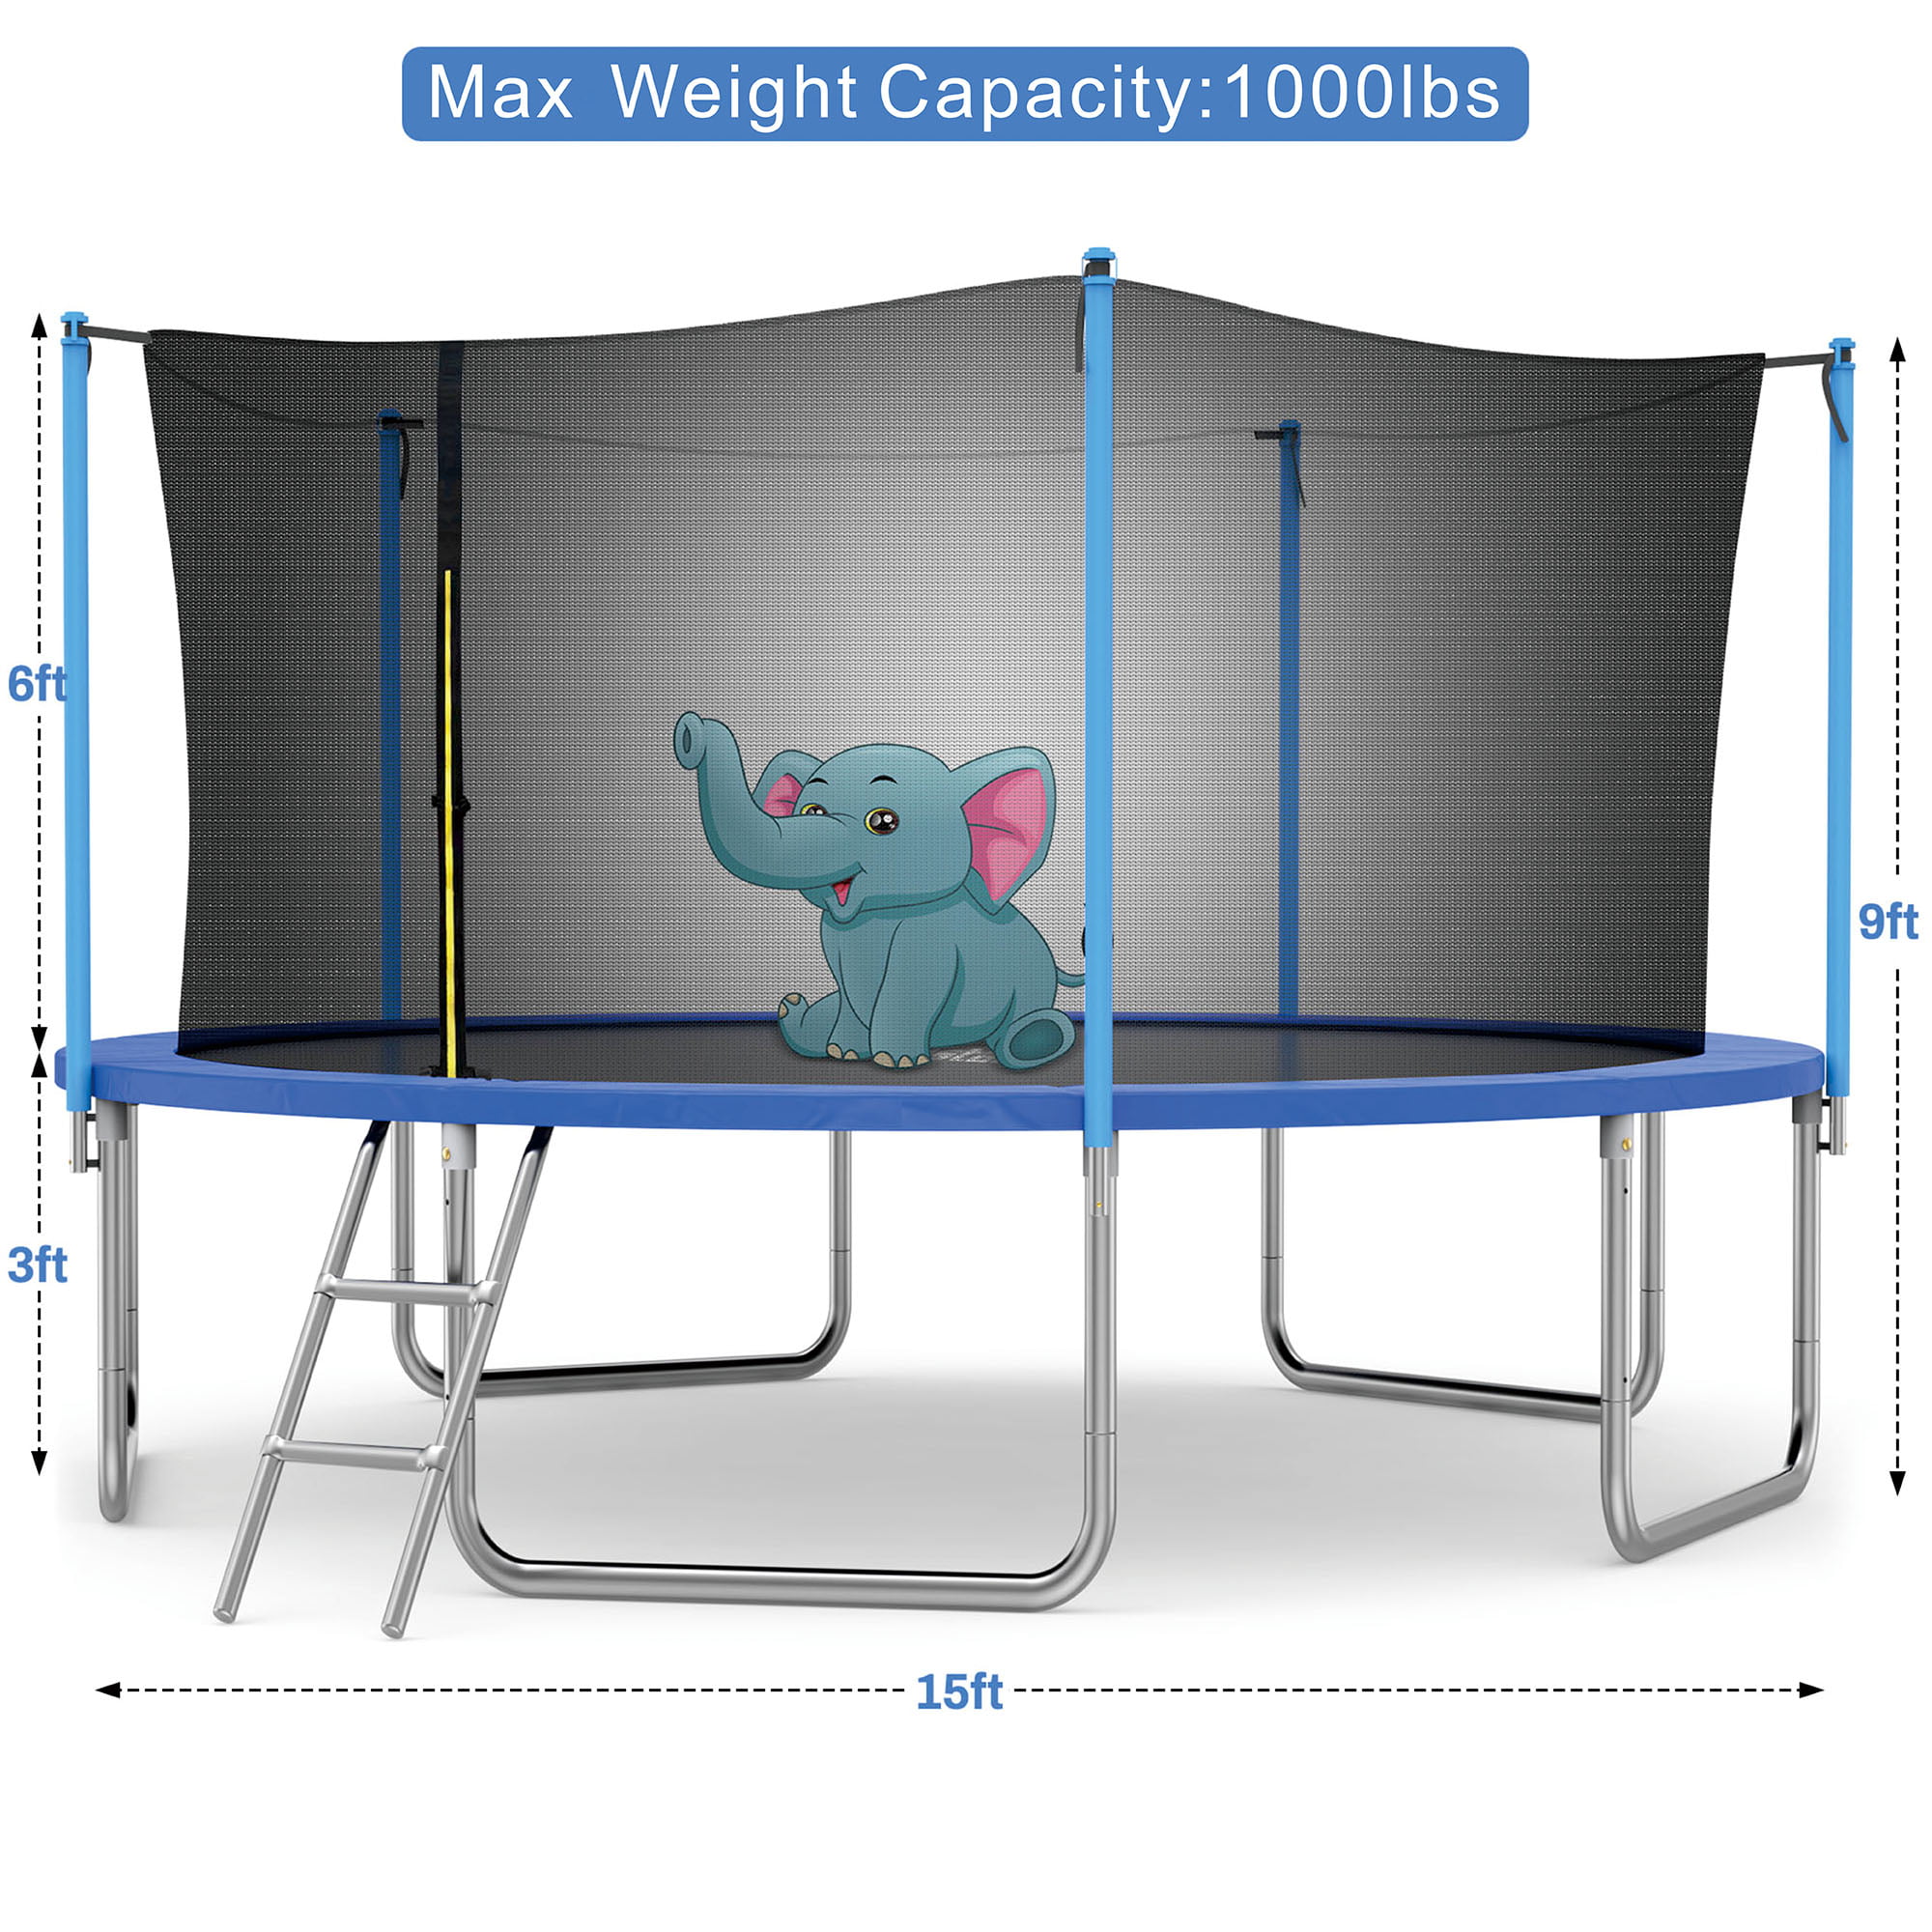 Famistar 15FT Trampoline, Recreational Trampoline with Safety Enclosure Net Metal Ladder Outdoor Trampoline for Kids Adults - image 5 of 10